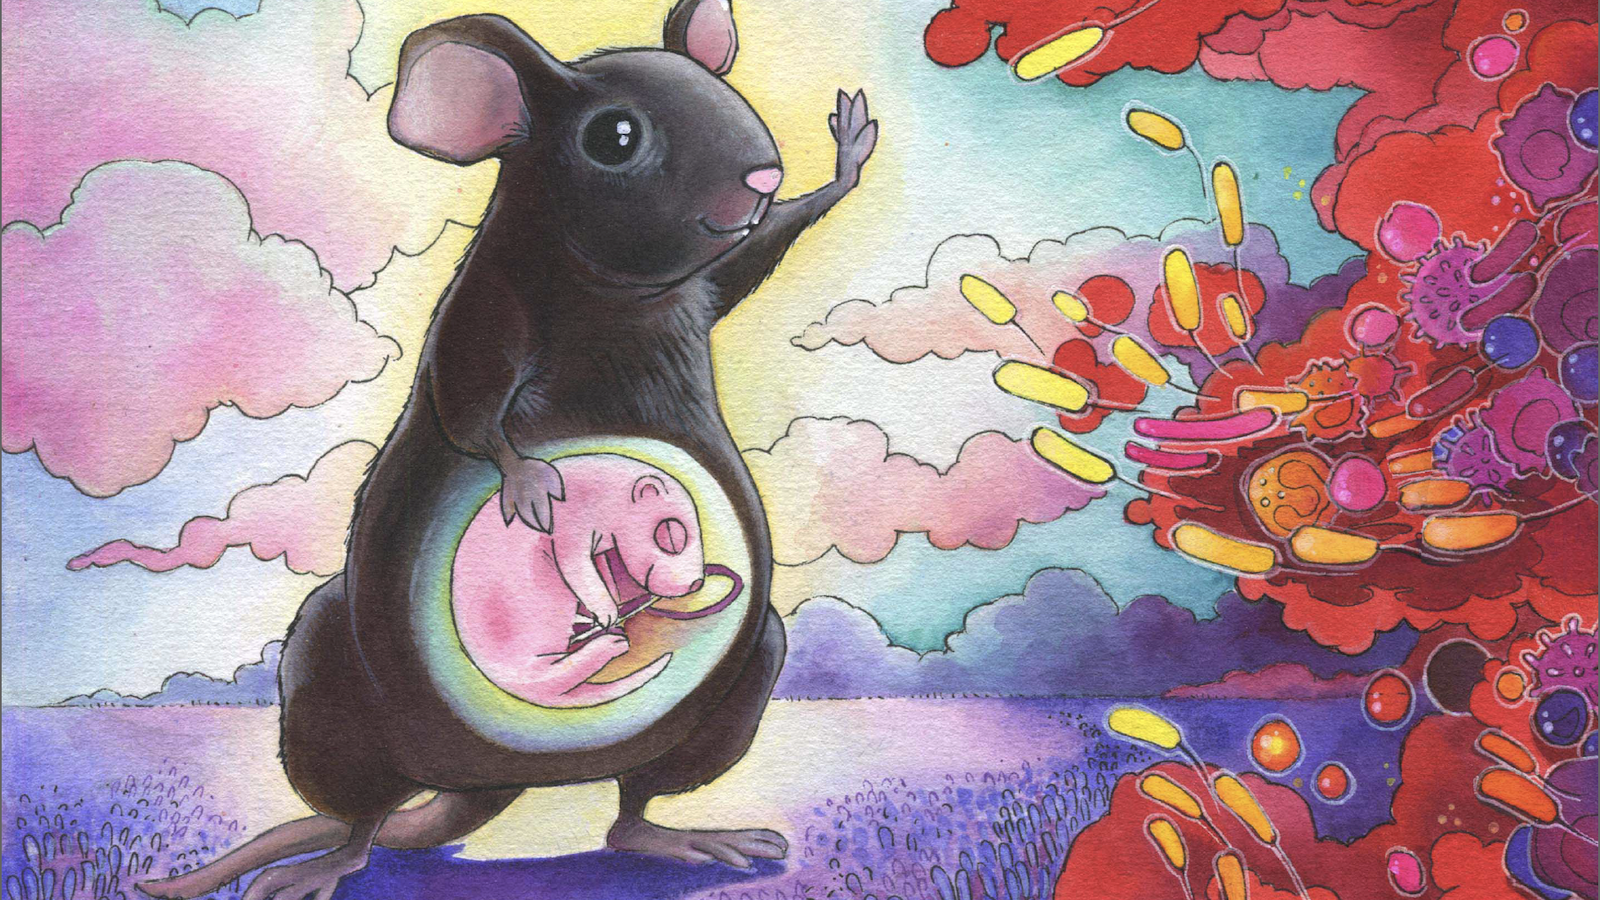 artist's rendition of a cartoon mouse protecting her fetus from harmful cells